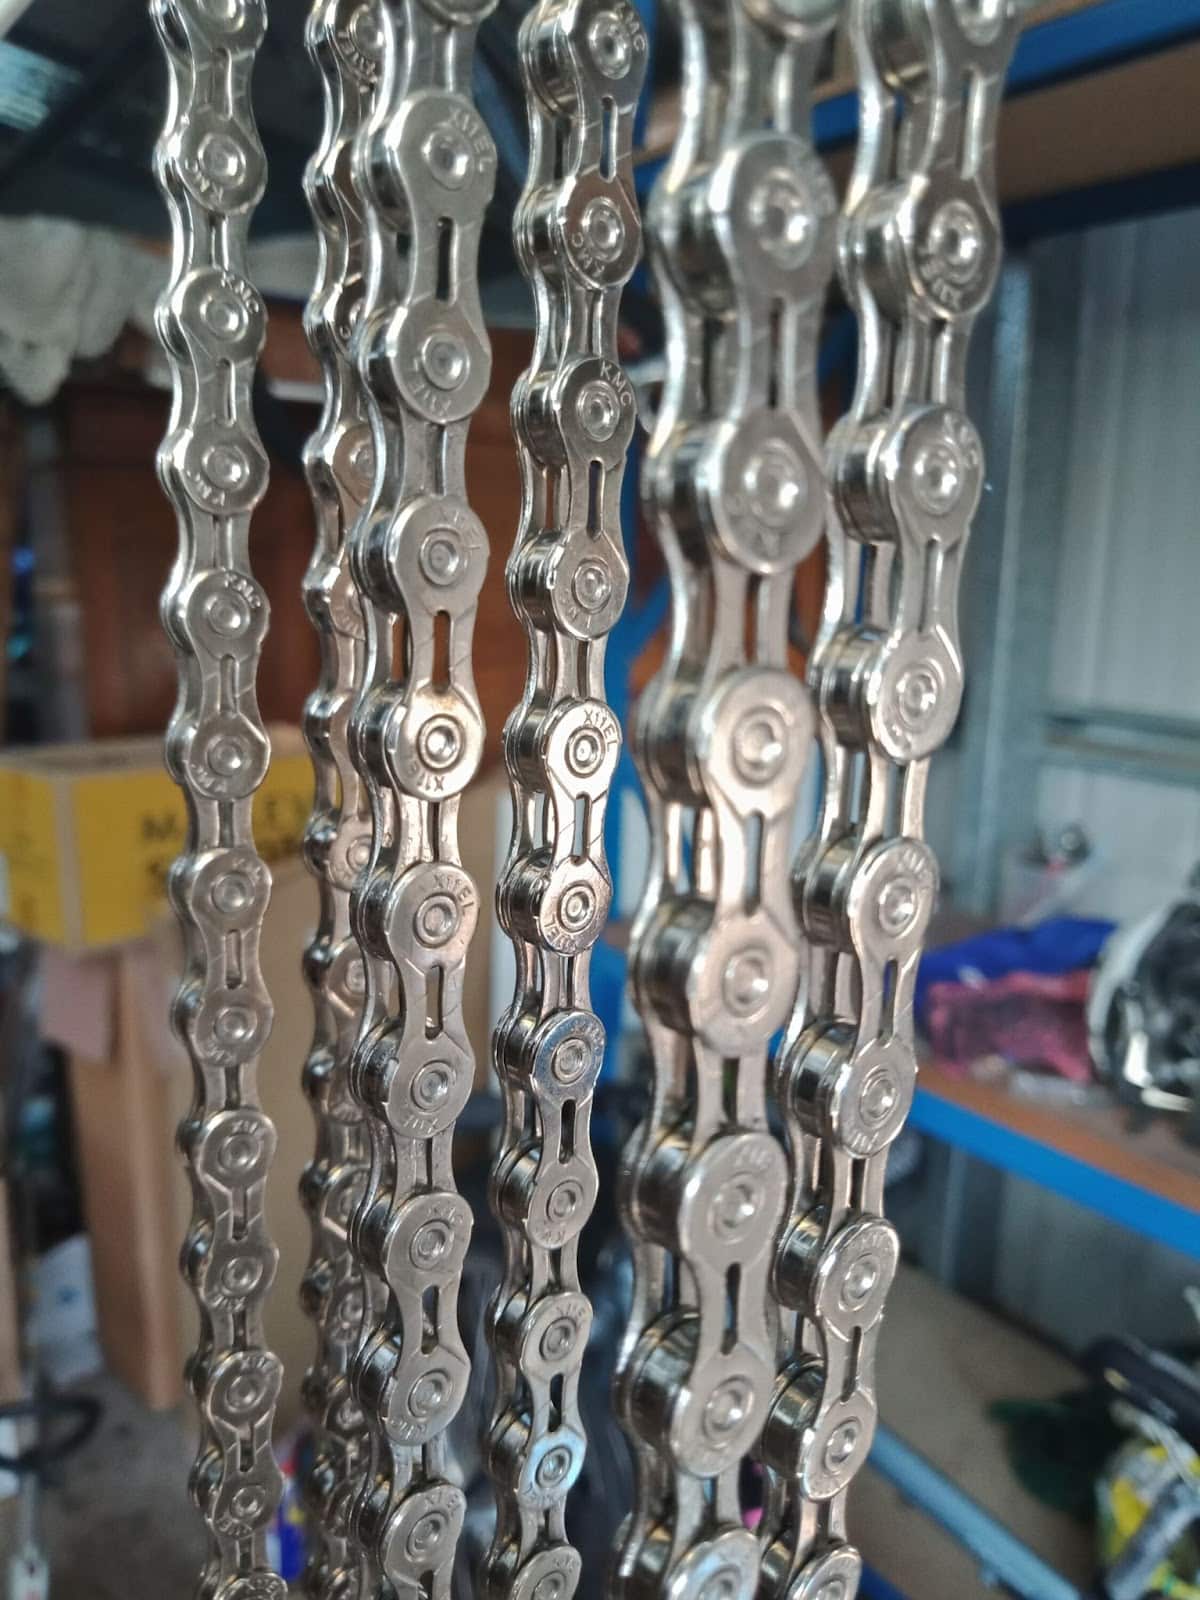 When comparing chains that have been lubed with mountain bike wax vs. chain lube, mountain bike wax seems to keep chains cleaner.